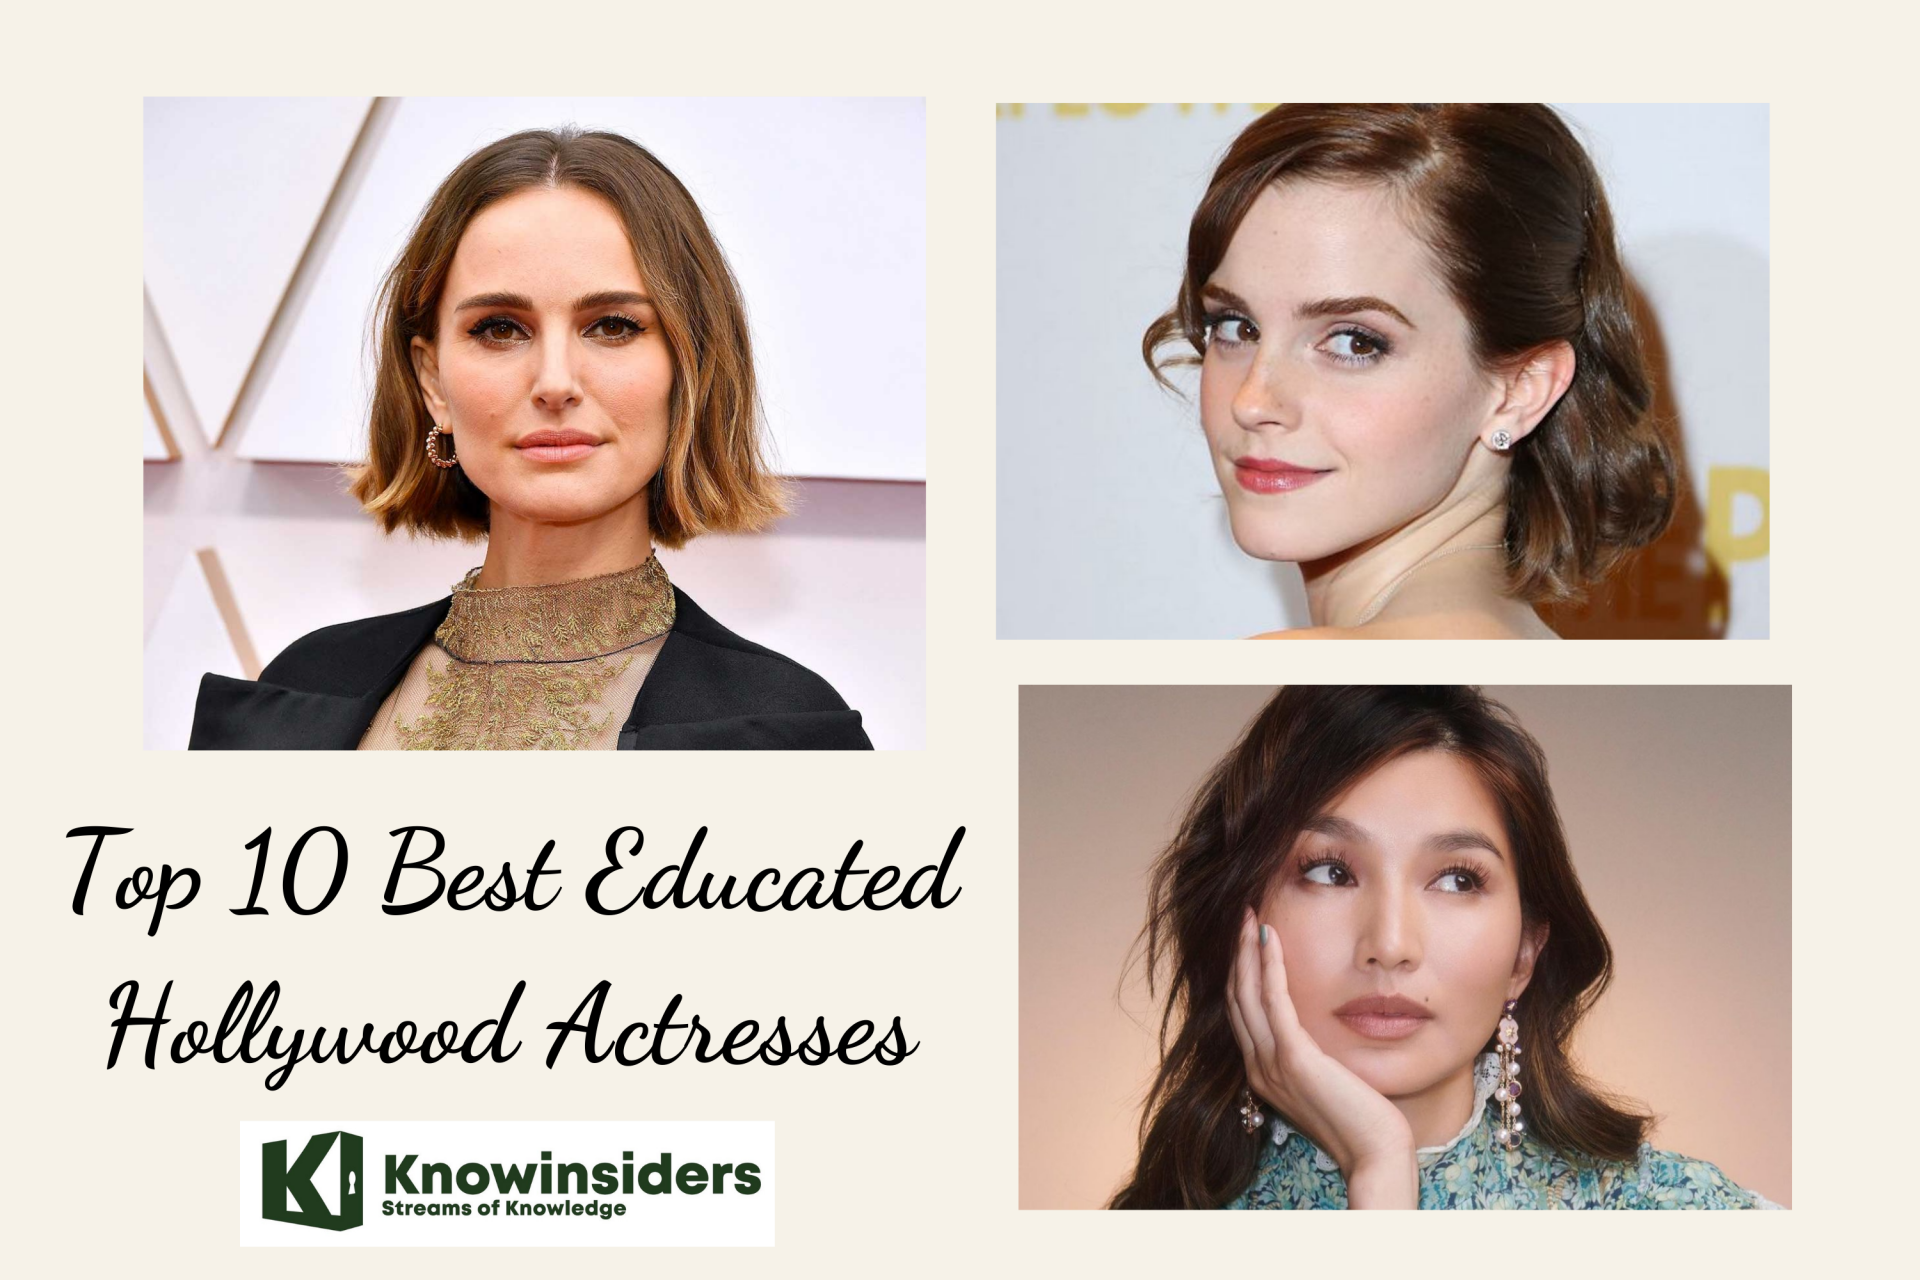 Top 10 Best Educated Hollywood Actresses